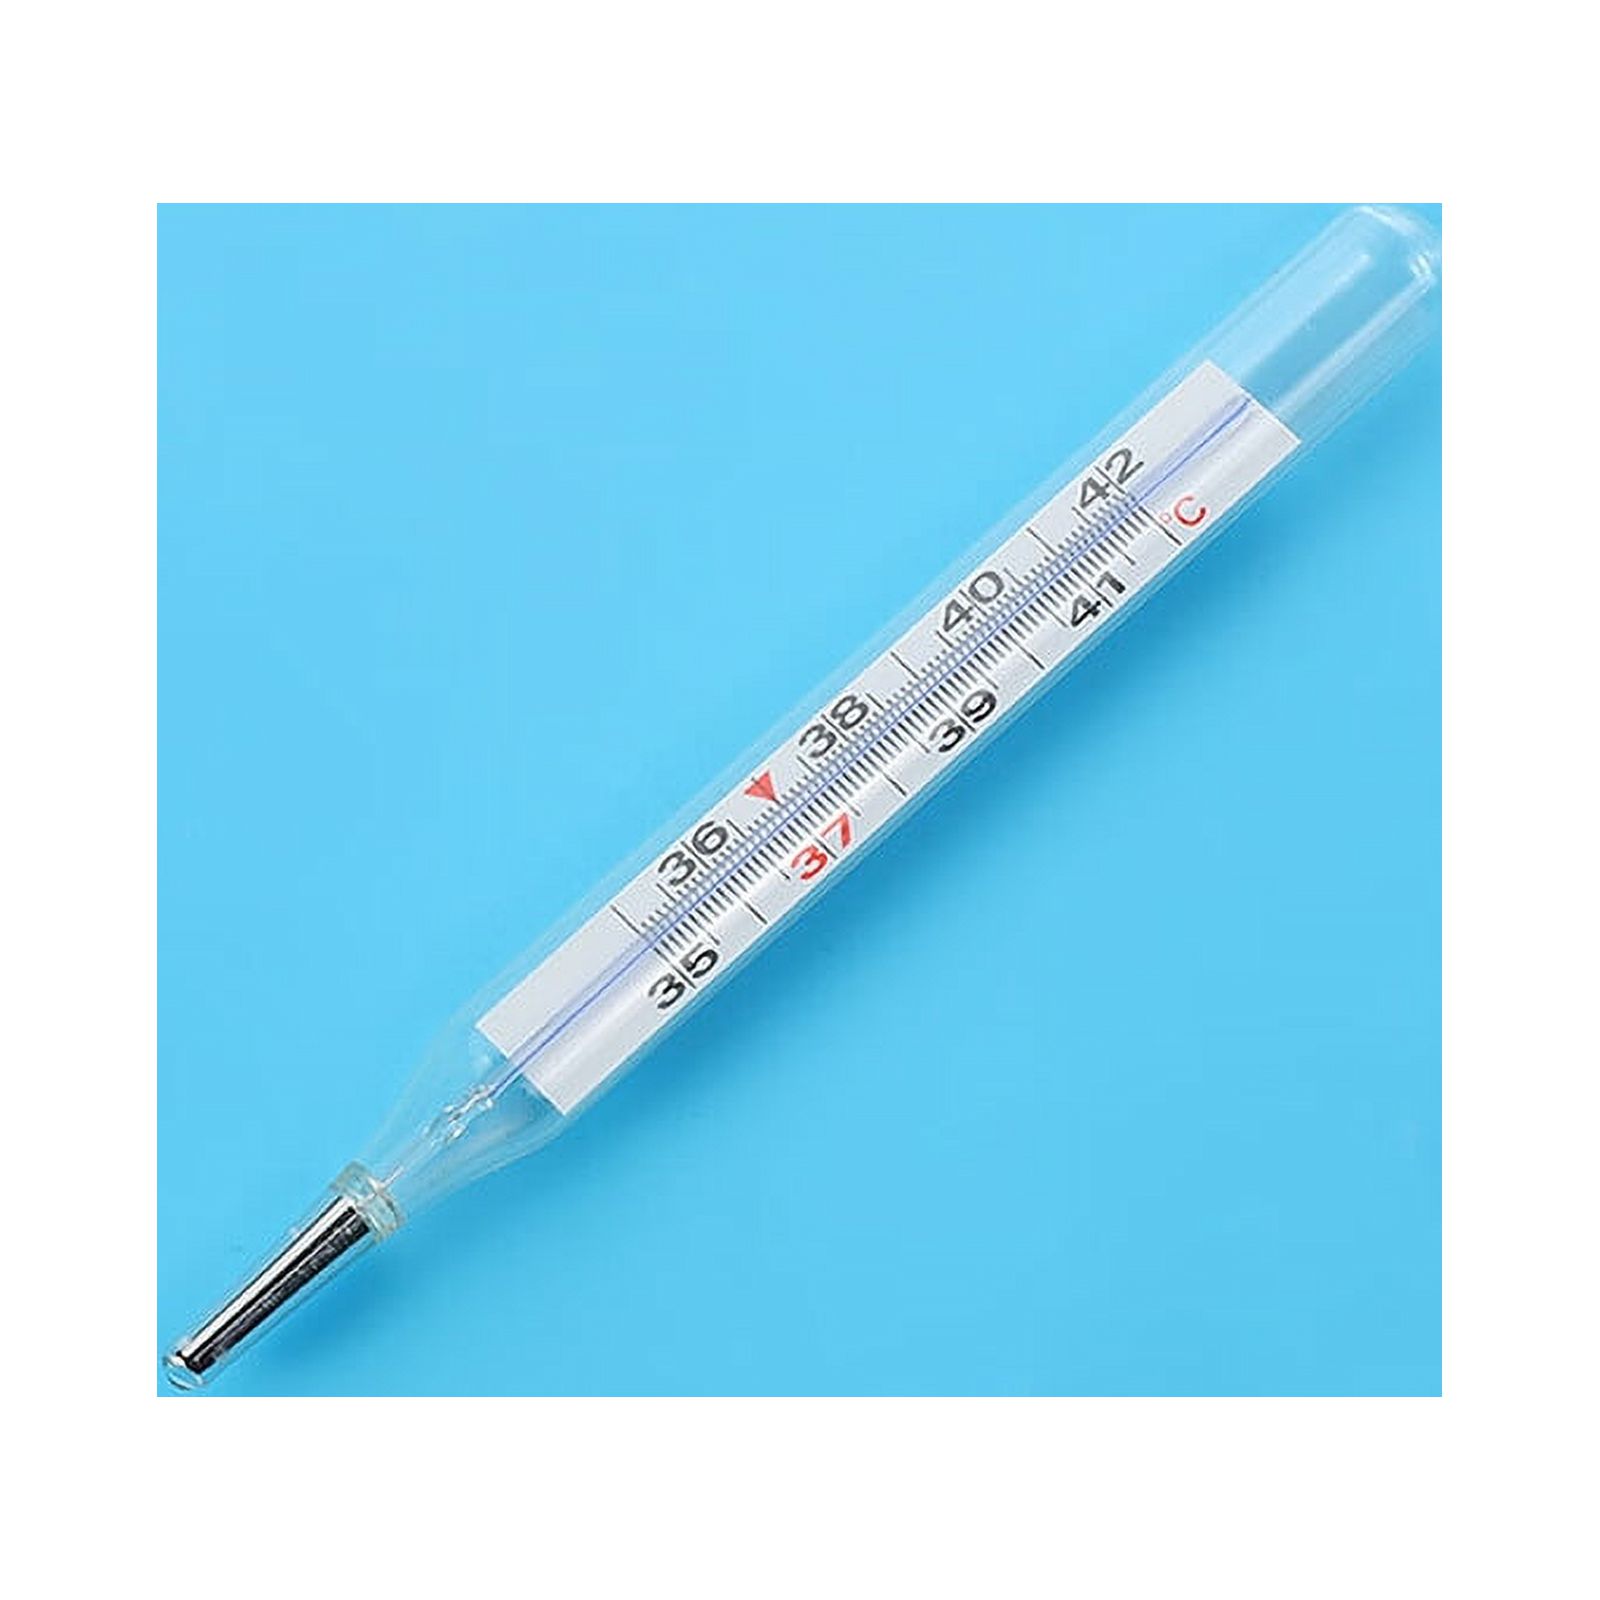 Ostrifin 1Pc Medical Mercury Freeglass Thermometer Clinical Measurement Device - image 1 of 5